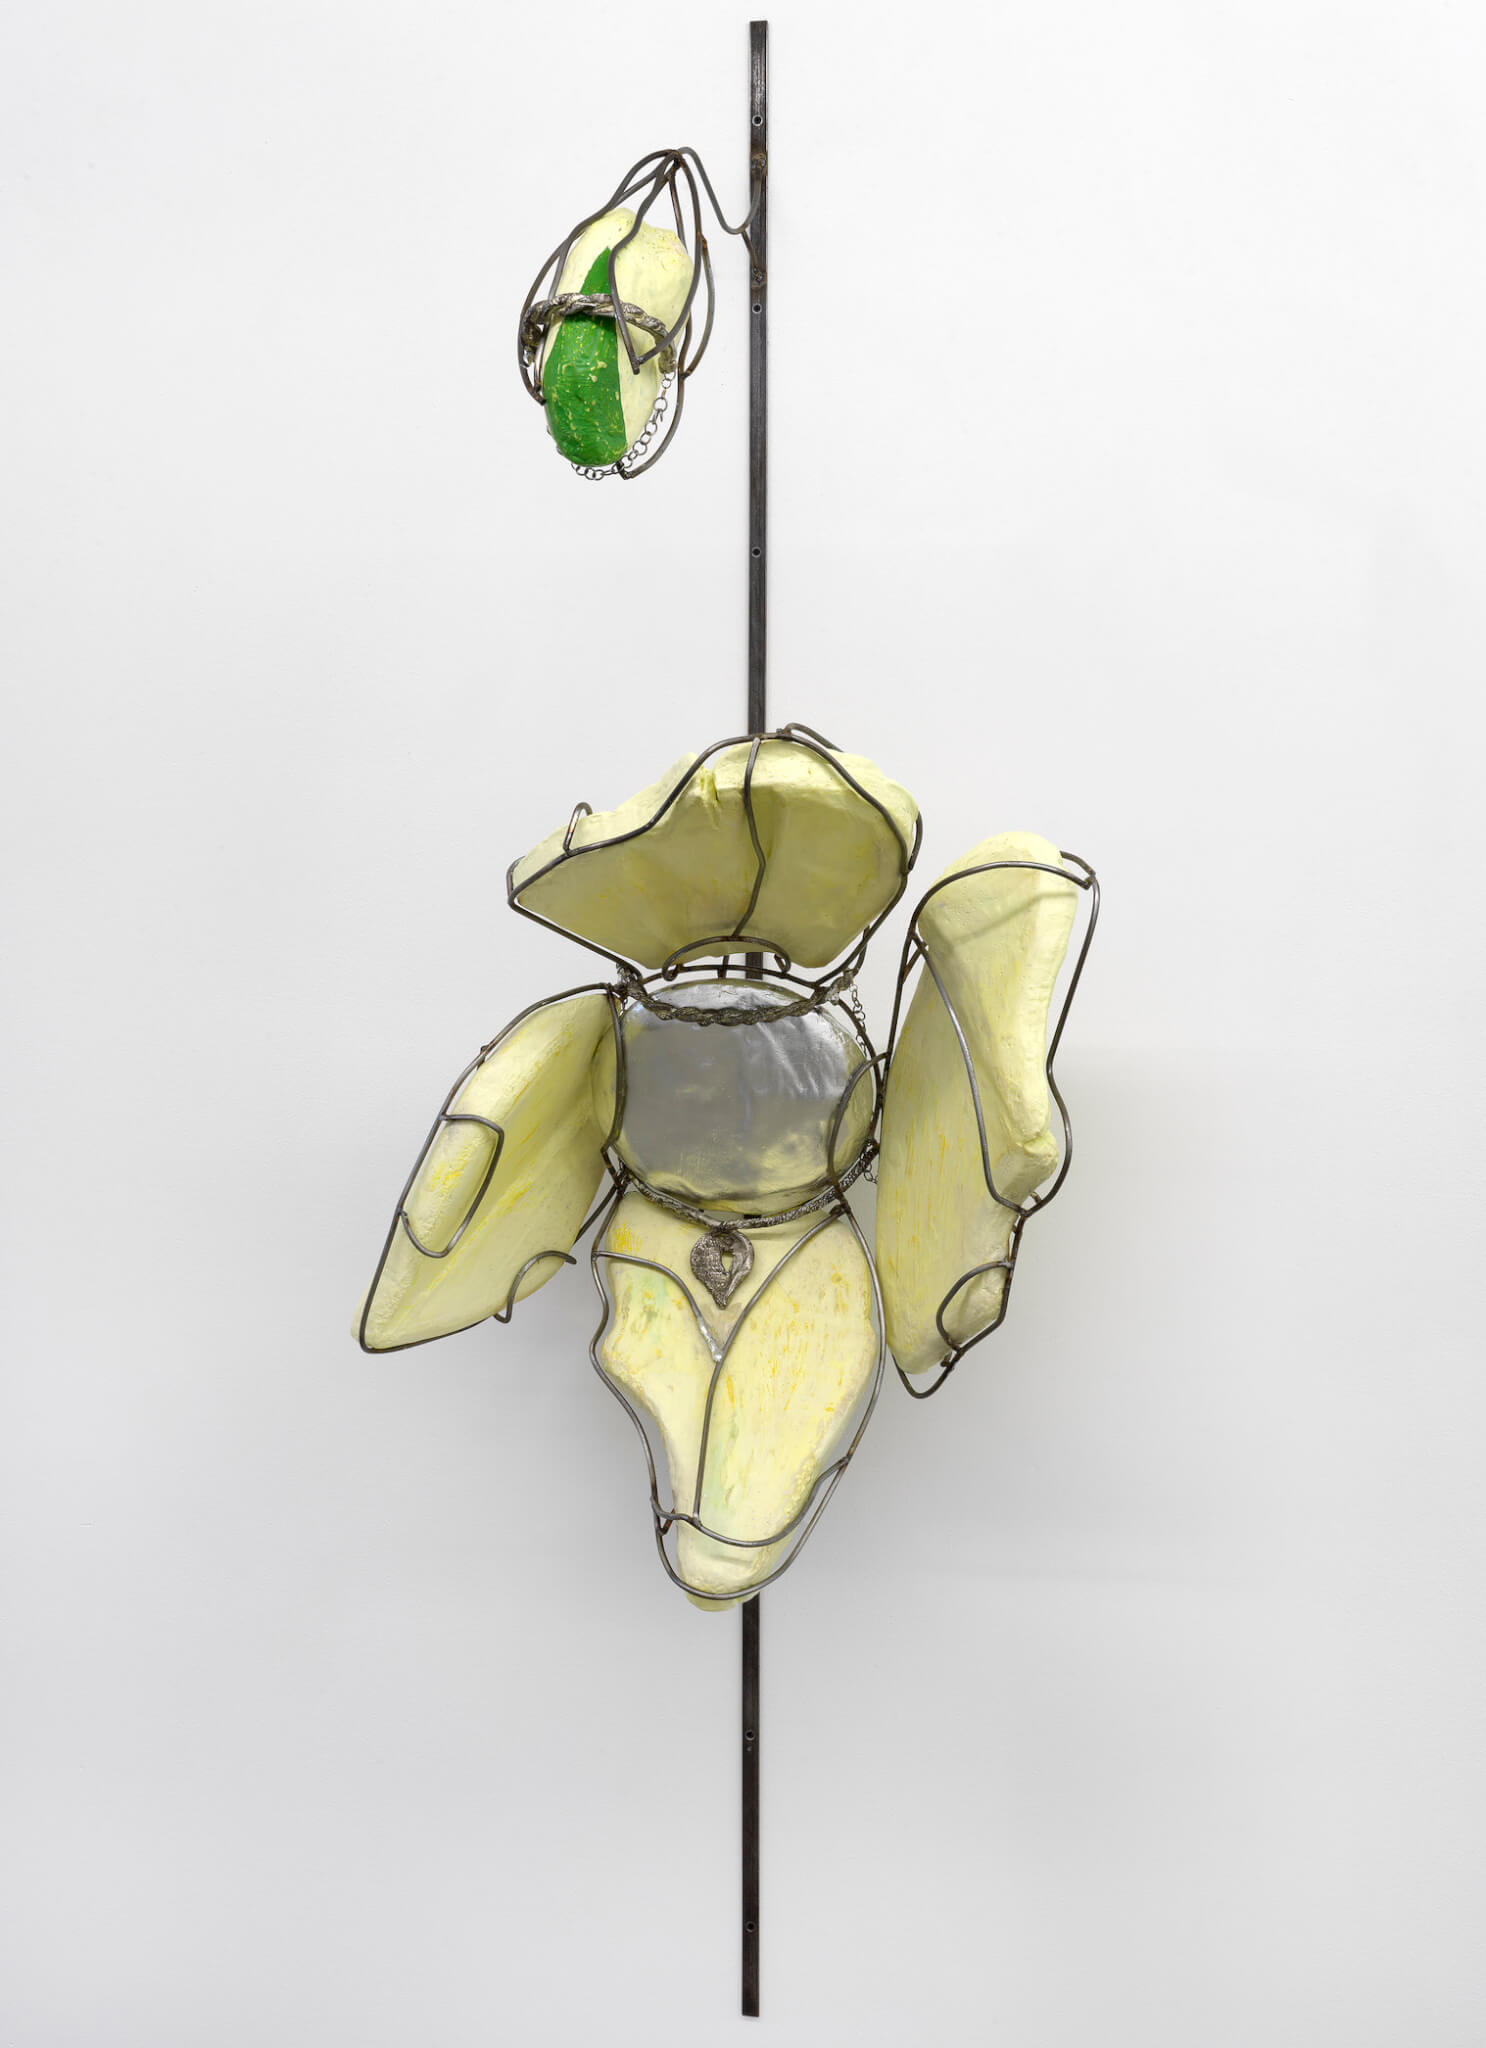 3 Em Rooney - Moneses Uniflora for Jackson and Marlowe, 2019 - 213 x 74 x 66 cm - Galerie Fons Welters, Amsterdam - ph GJ v Rooij (2)